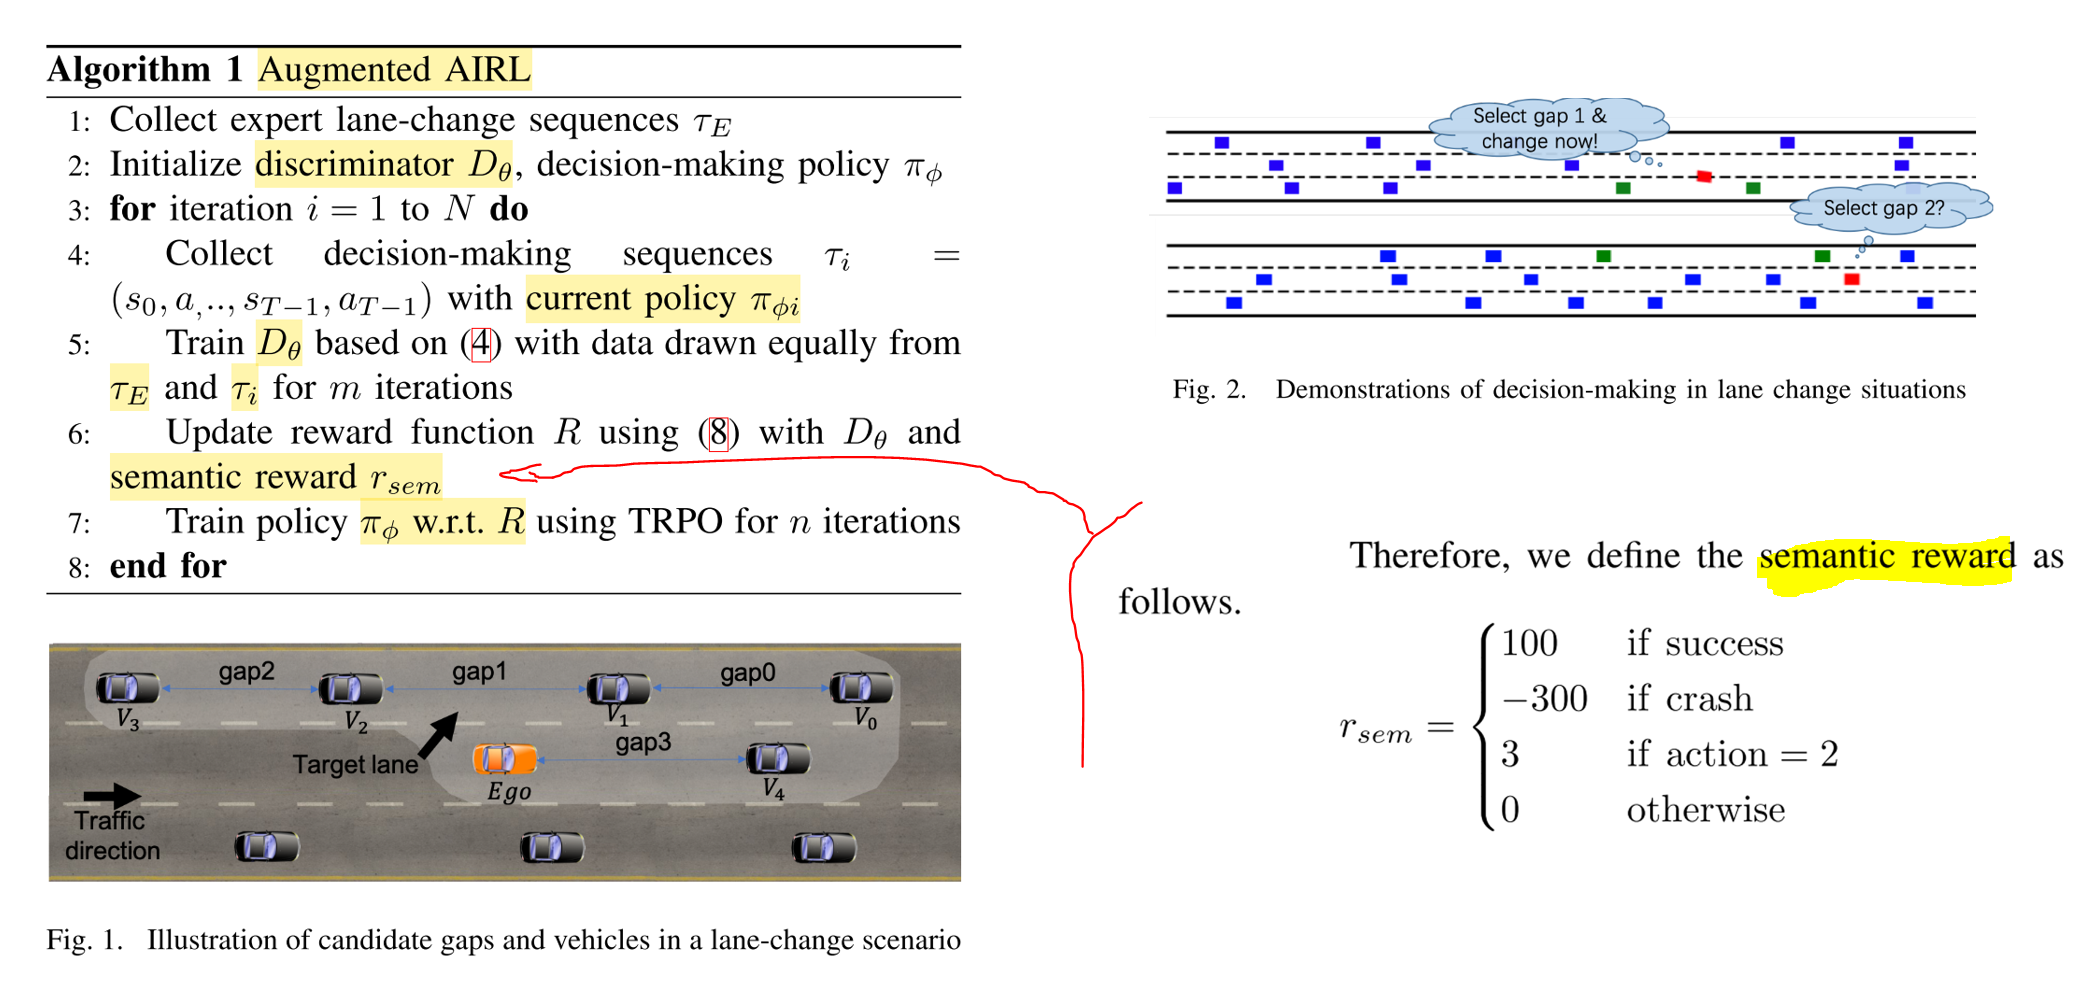 In Adversarial IRL (AIRL), the discriminator tries to distinguish learnt actions from demonstrated expert actions. Action masking is applied, removing some combinations that are not preferable, in order to reduce the unnecessary exploration. Finally, the reward function of the discriminator is extended with some manually-designed semantic reward to help the agent successfully complete the lane change and not to collide with other objects. Source.